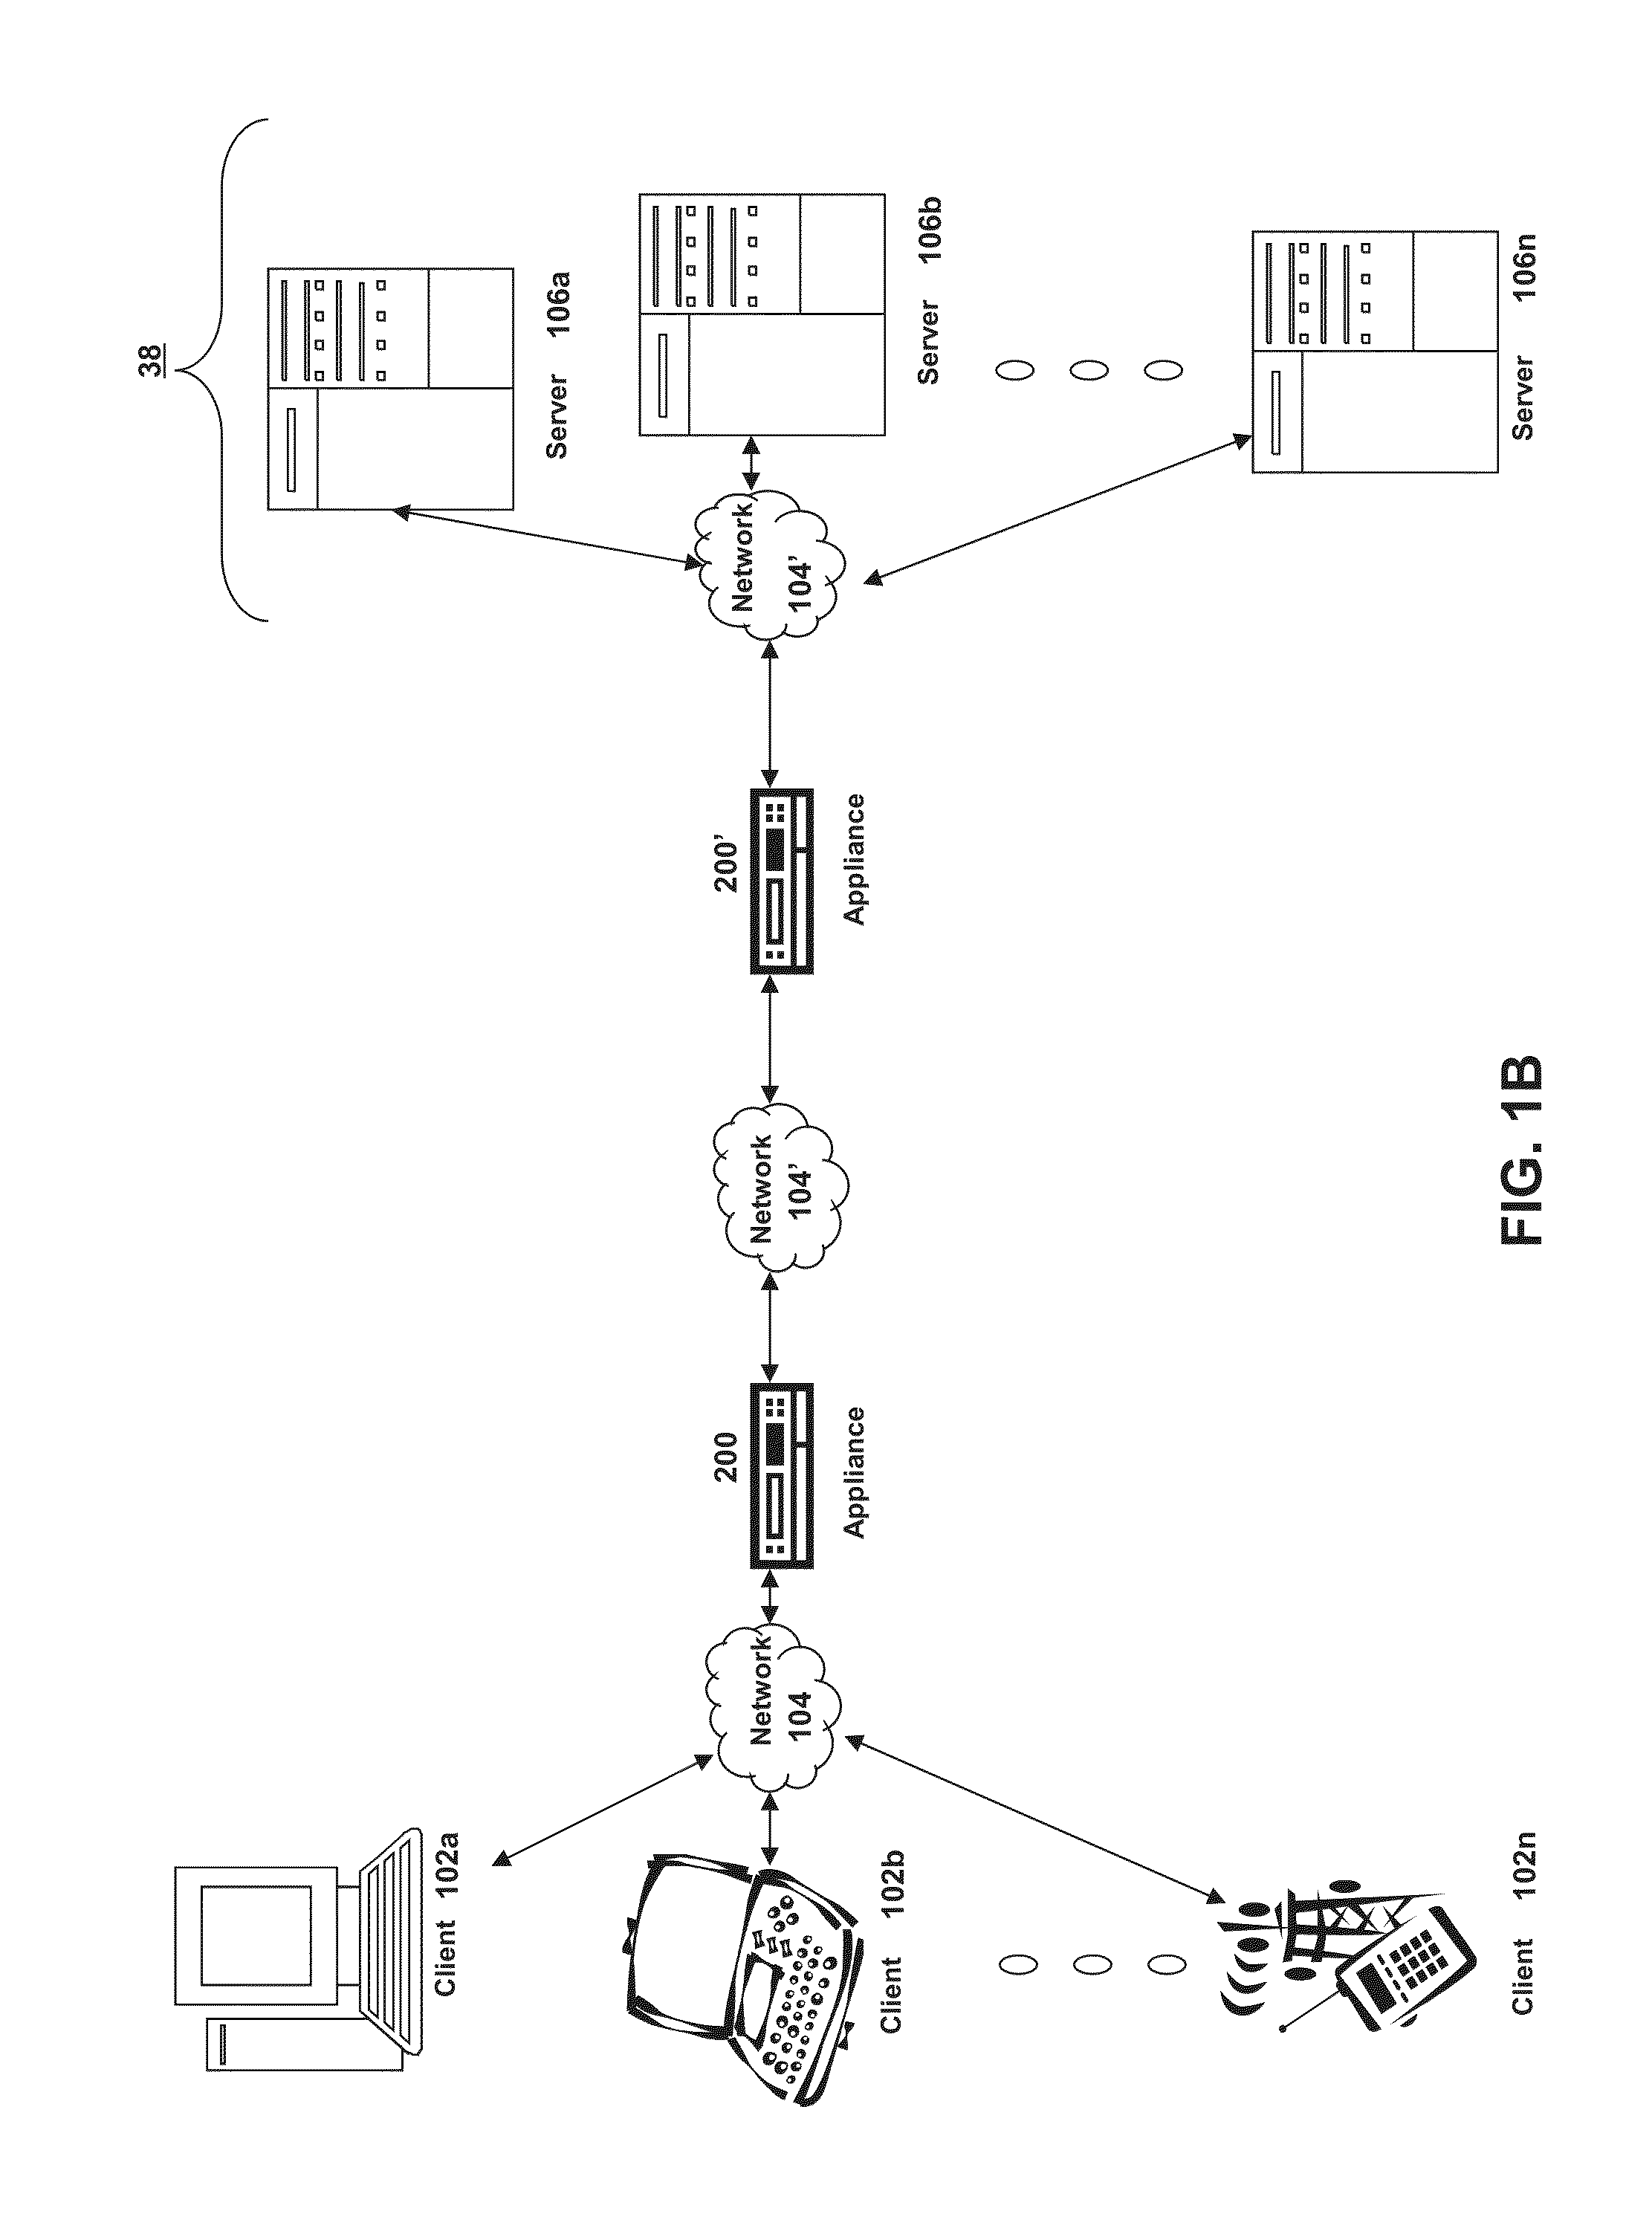 Systems and methods for managing a guest virtual machine executing within a virtualized environment